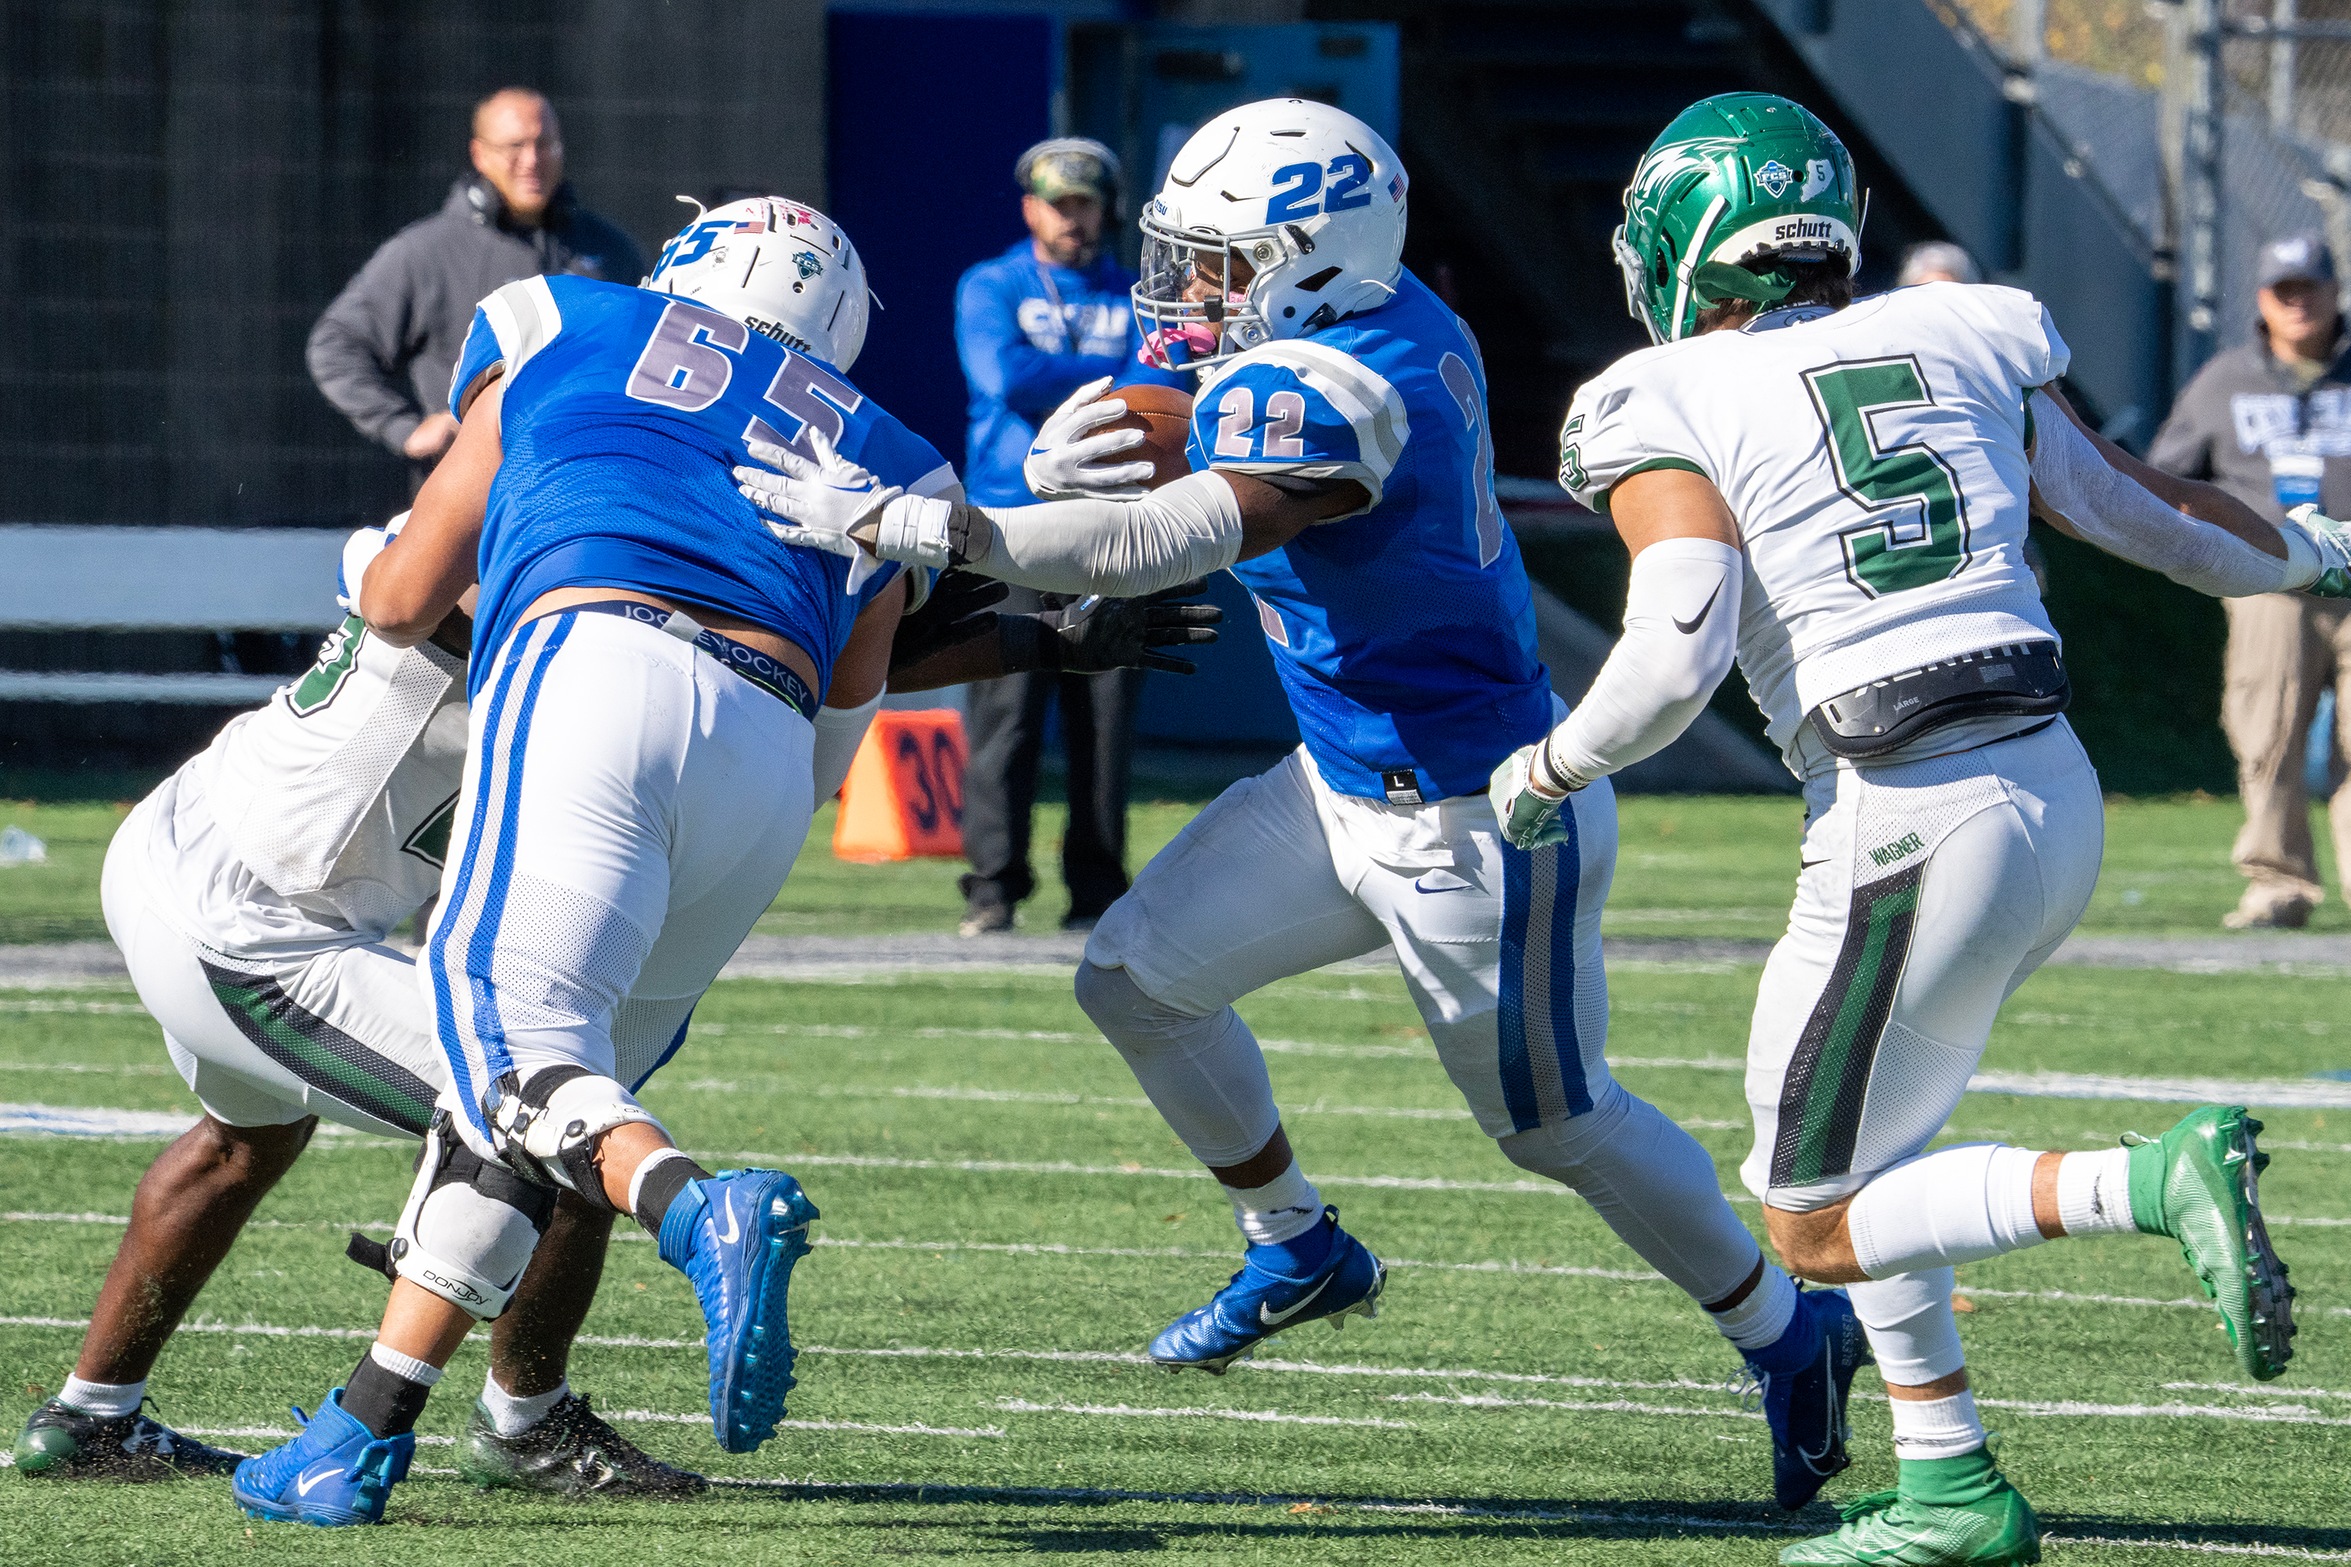 Nasir Smith had a career-high 174 yards, on 31 carries, and three touchdowns in the Blue Devils win over Wagner on October 29. (Photo: Steve McLaughlin)